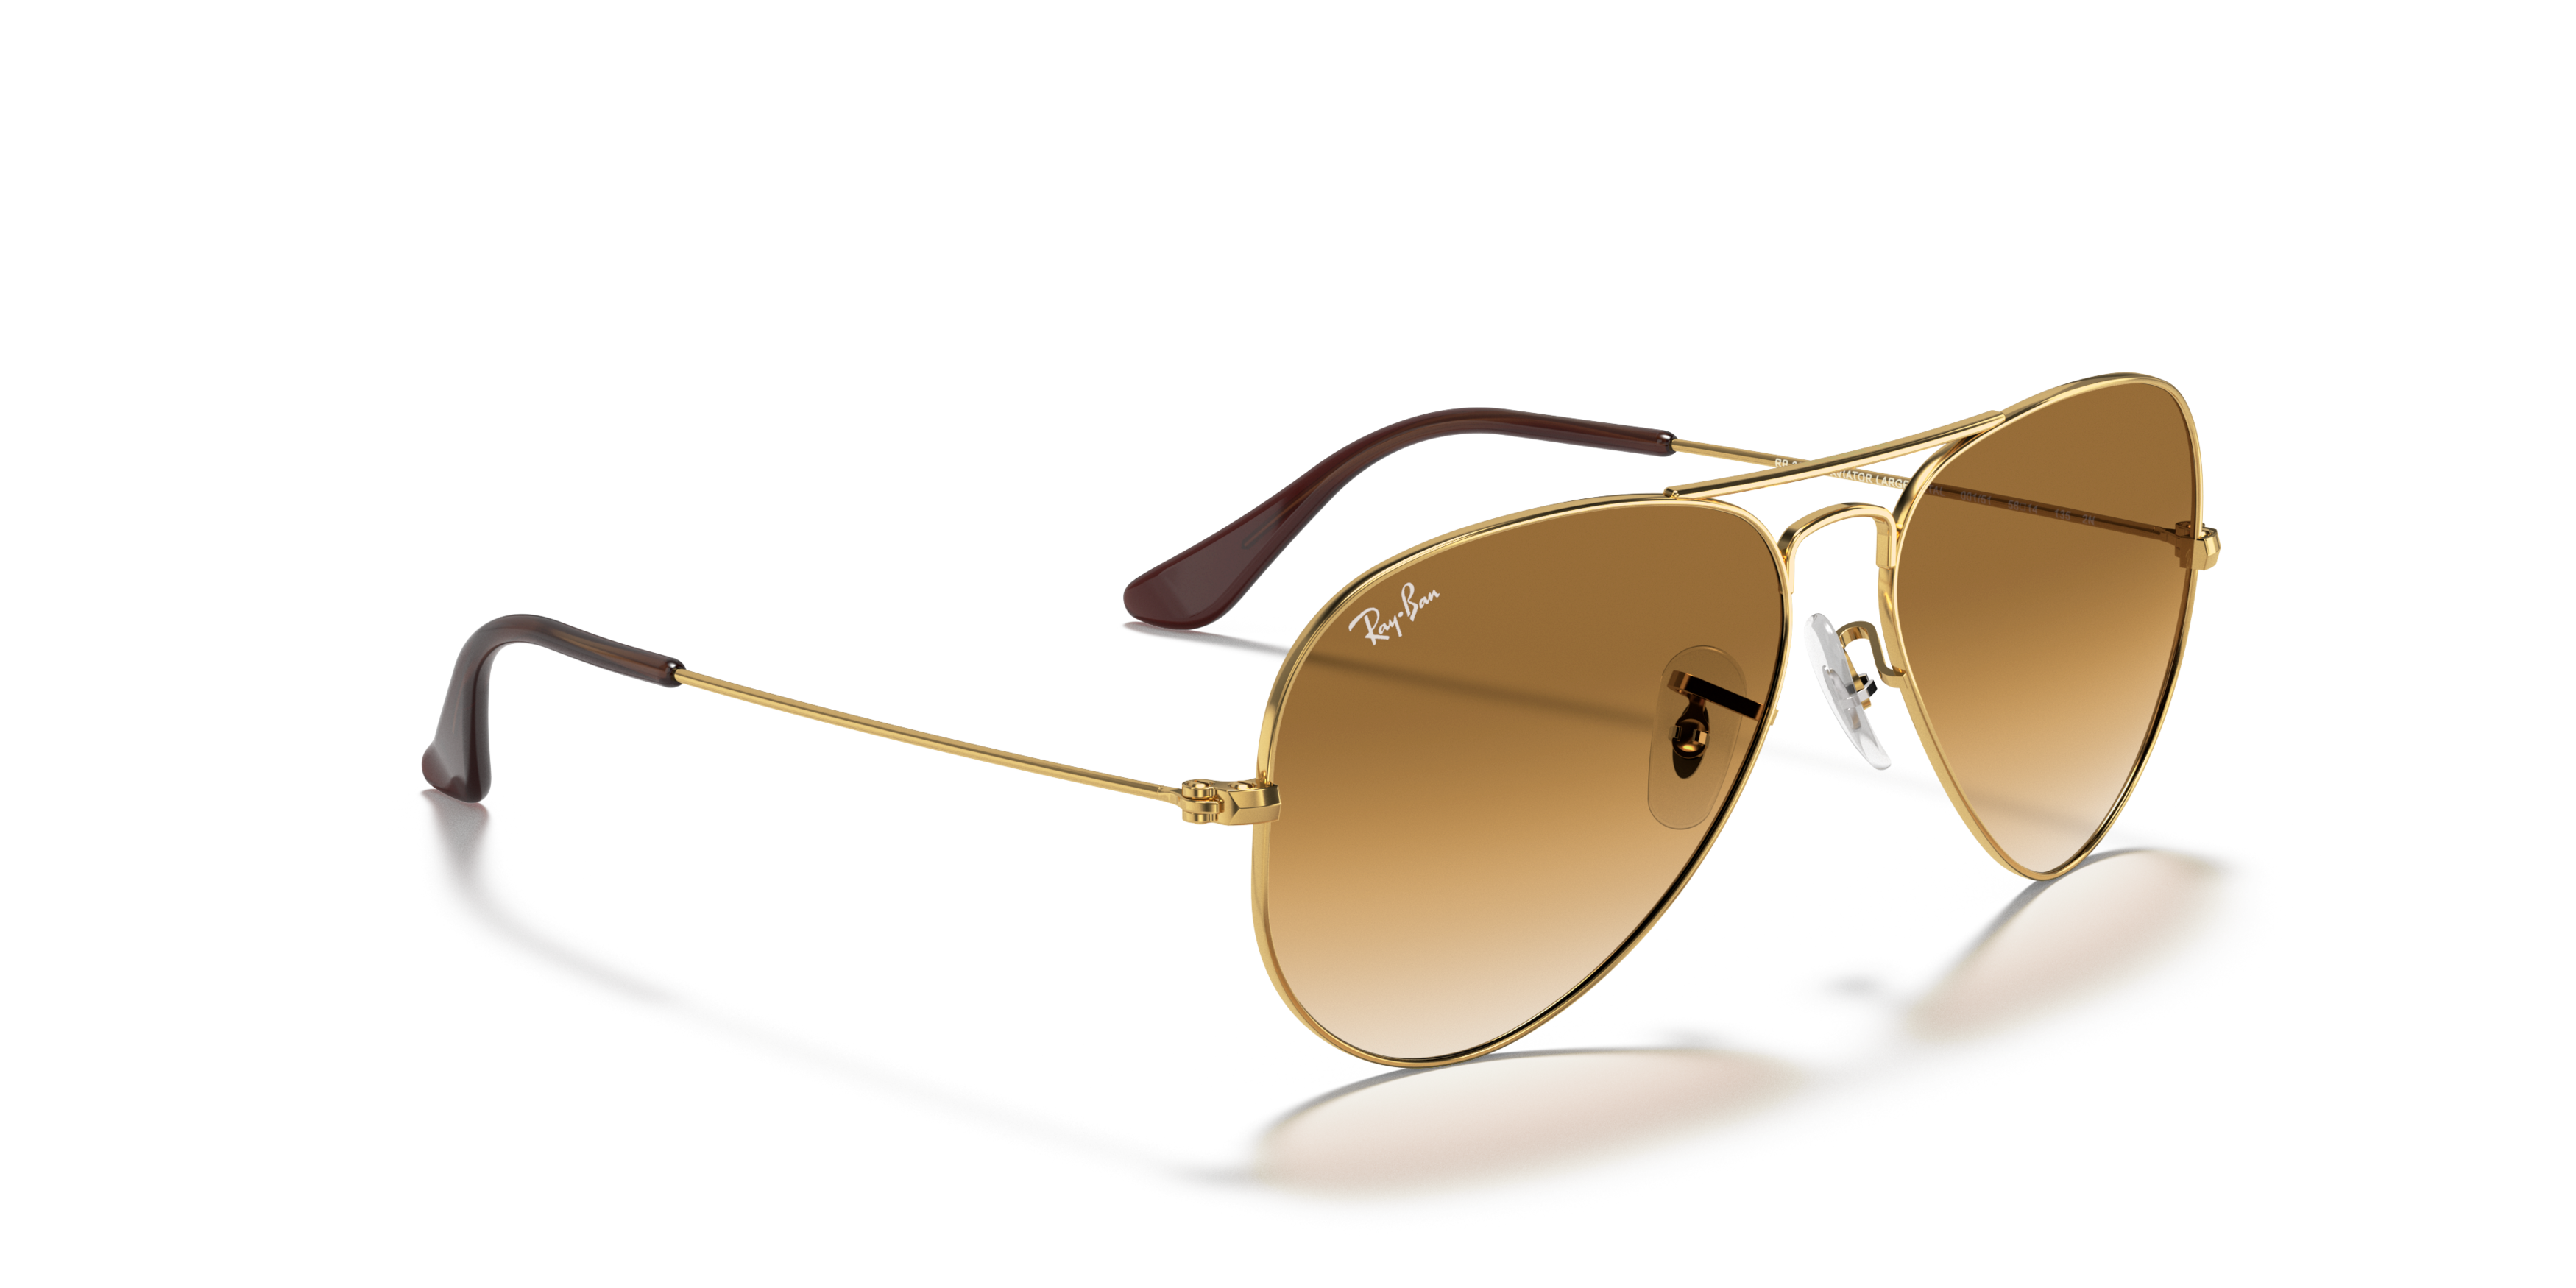 Angle_Right01 Ray-Ban Aviator RB 3025 (001/51) Sunglasses Brown / Gold